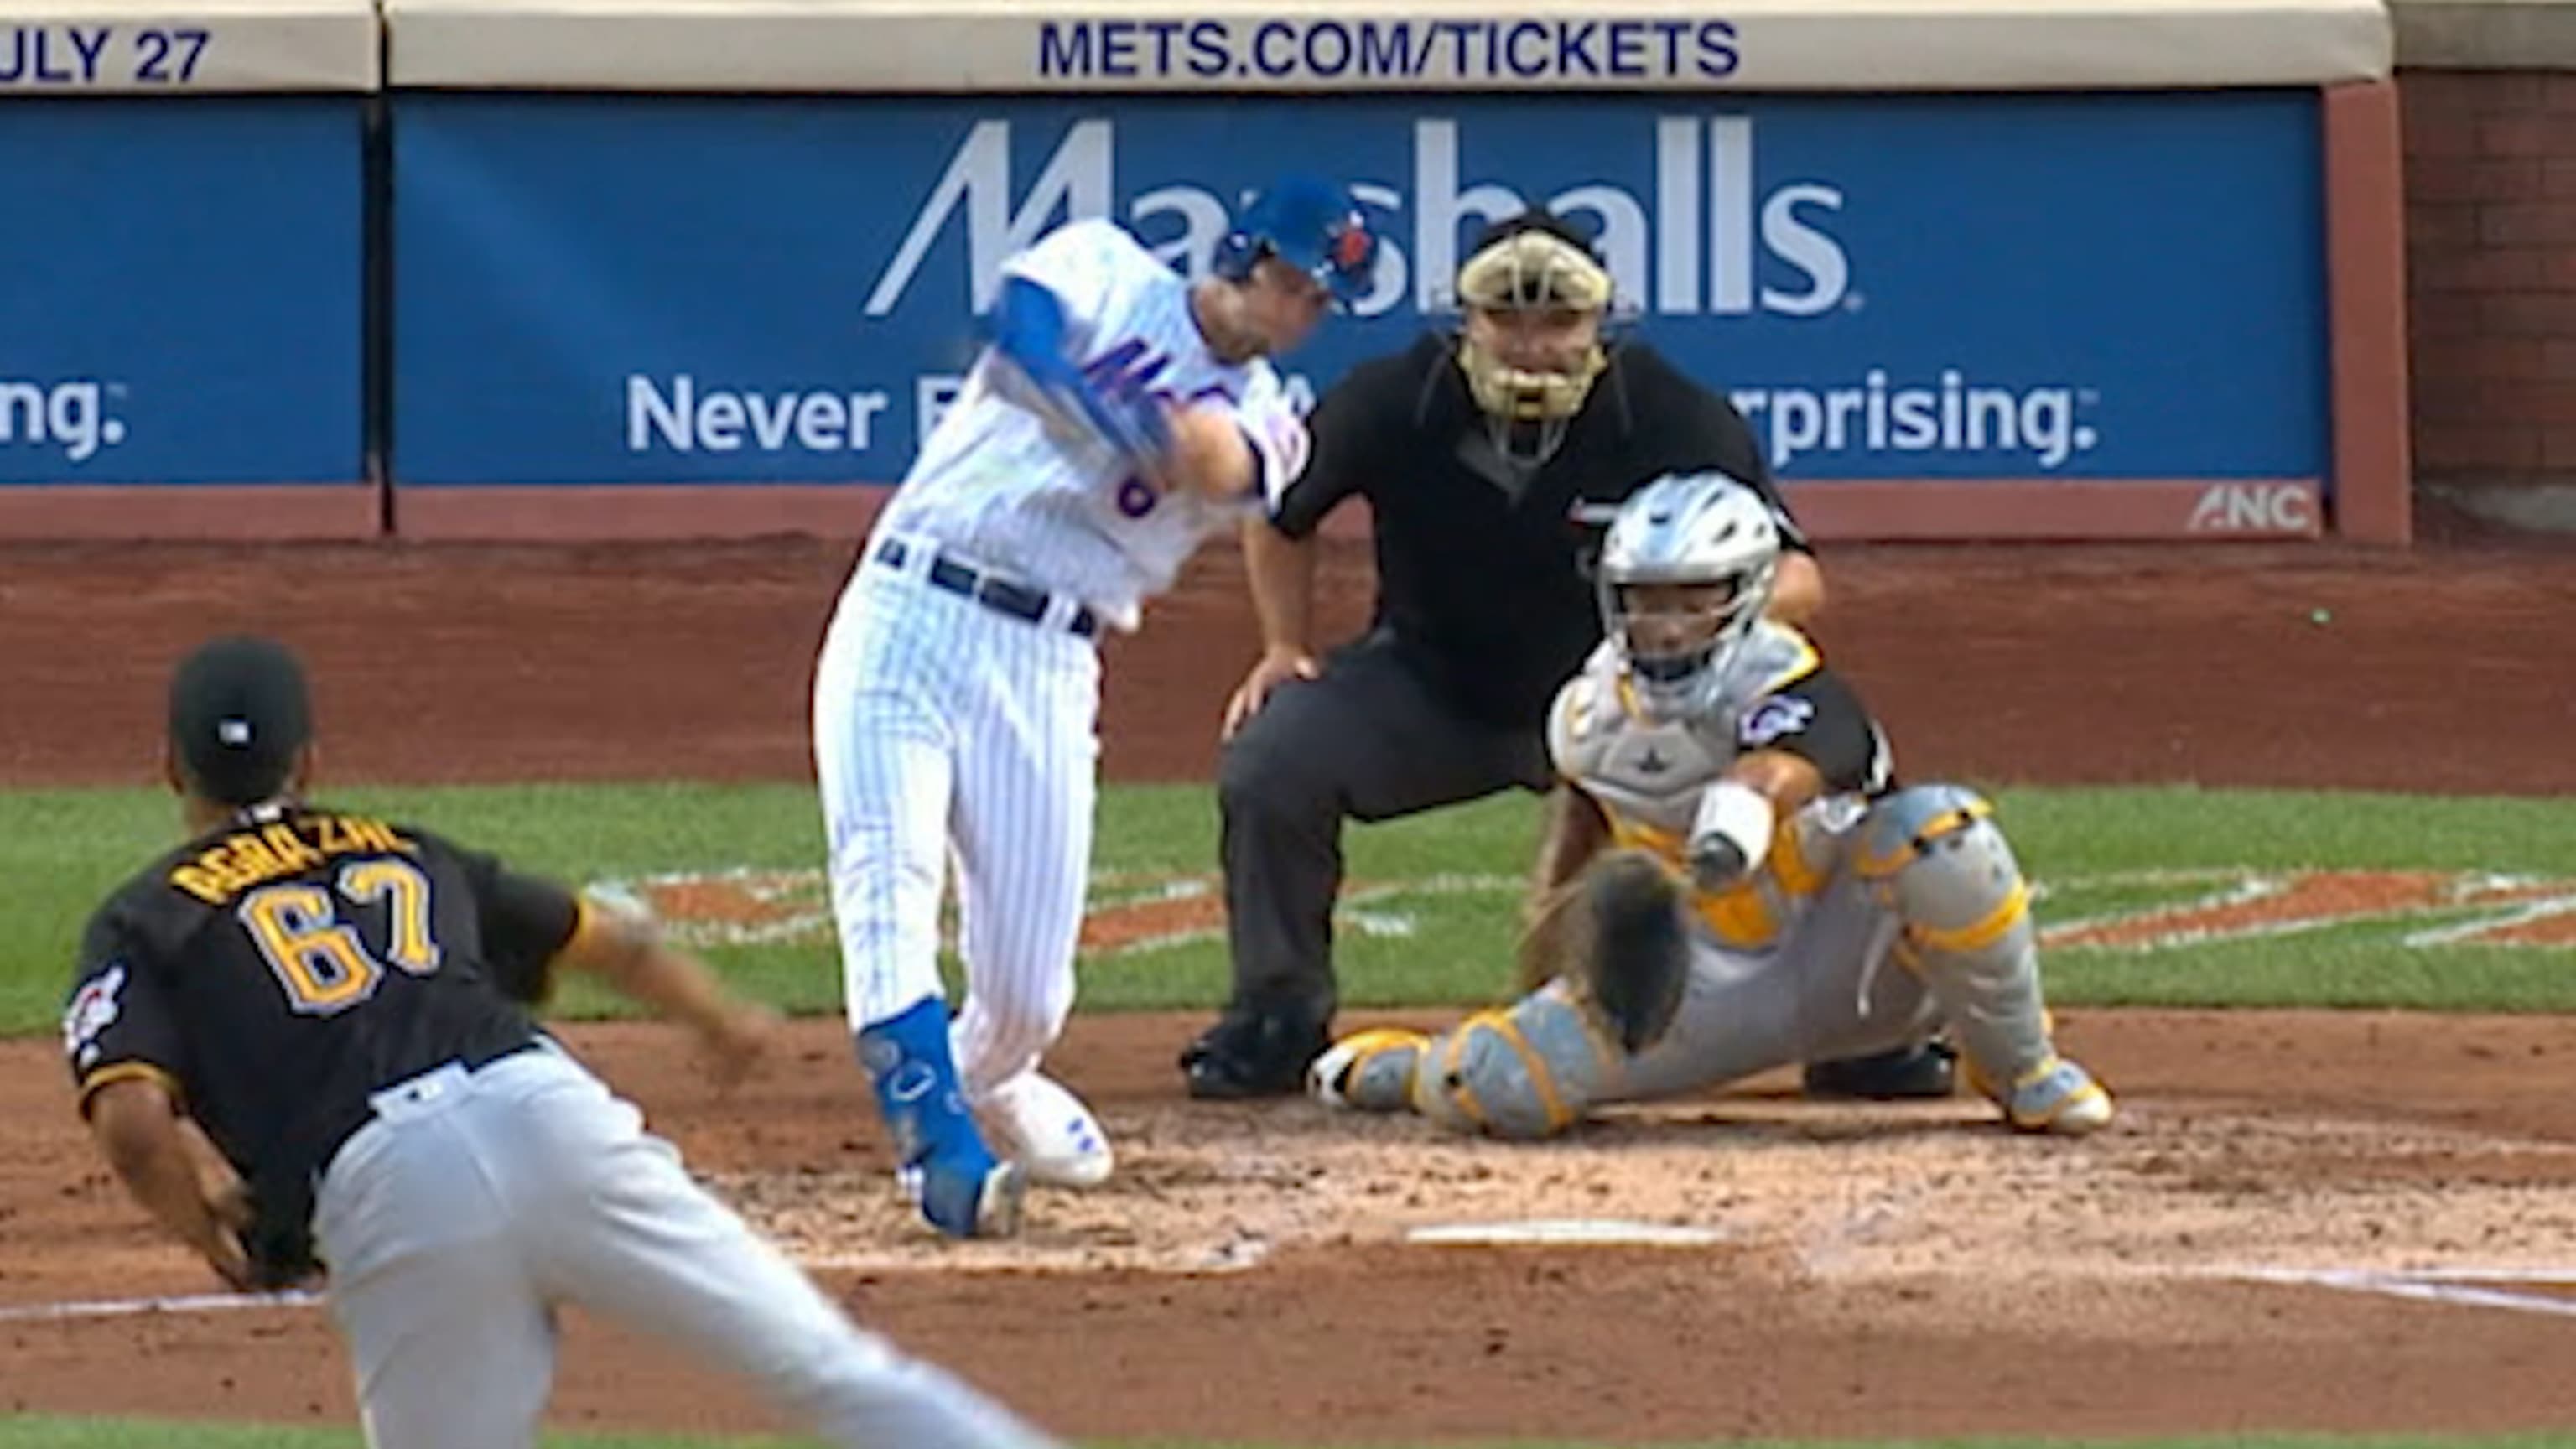 VIDEO: Jeff McNeil Hilariously Dedicates Friday Night's Home Run to Puppy  He Held Before Game